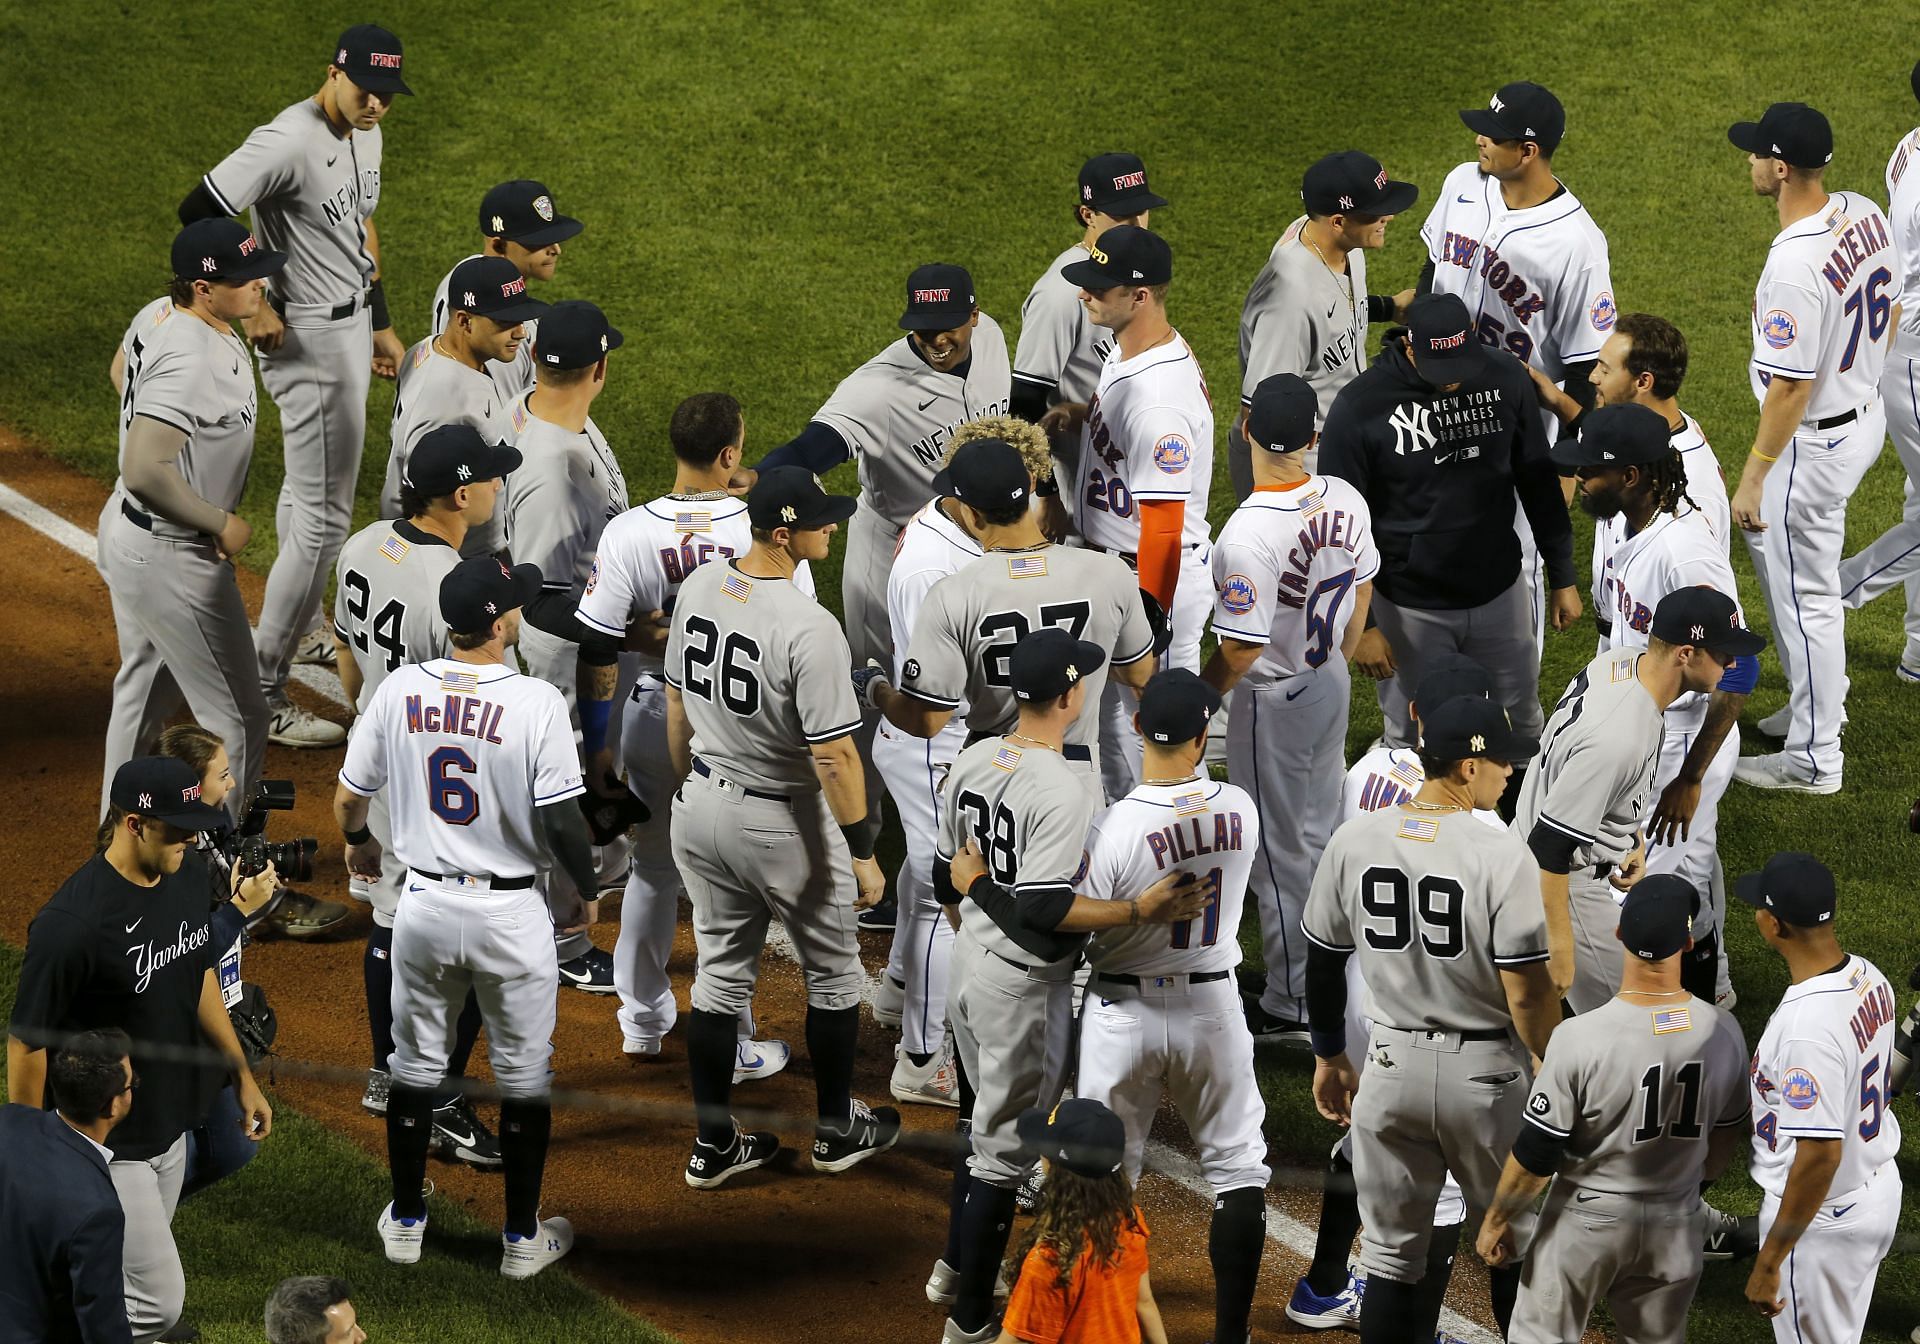 New York Yankees vs New York Mets: Which New York team has the better  chance of winning in 2023?